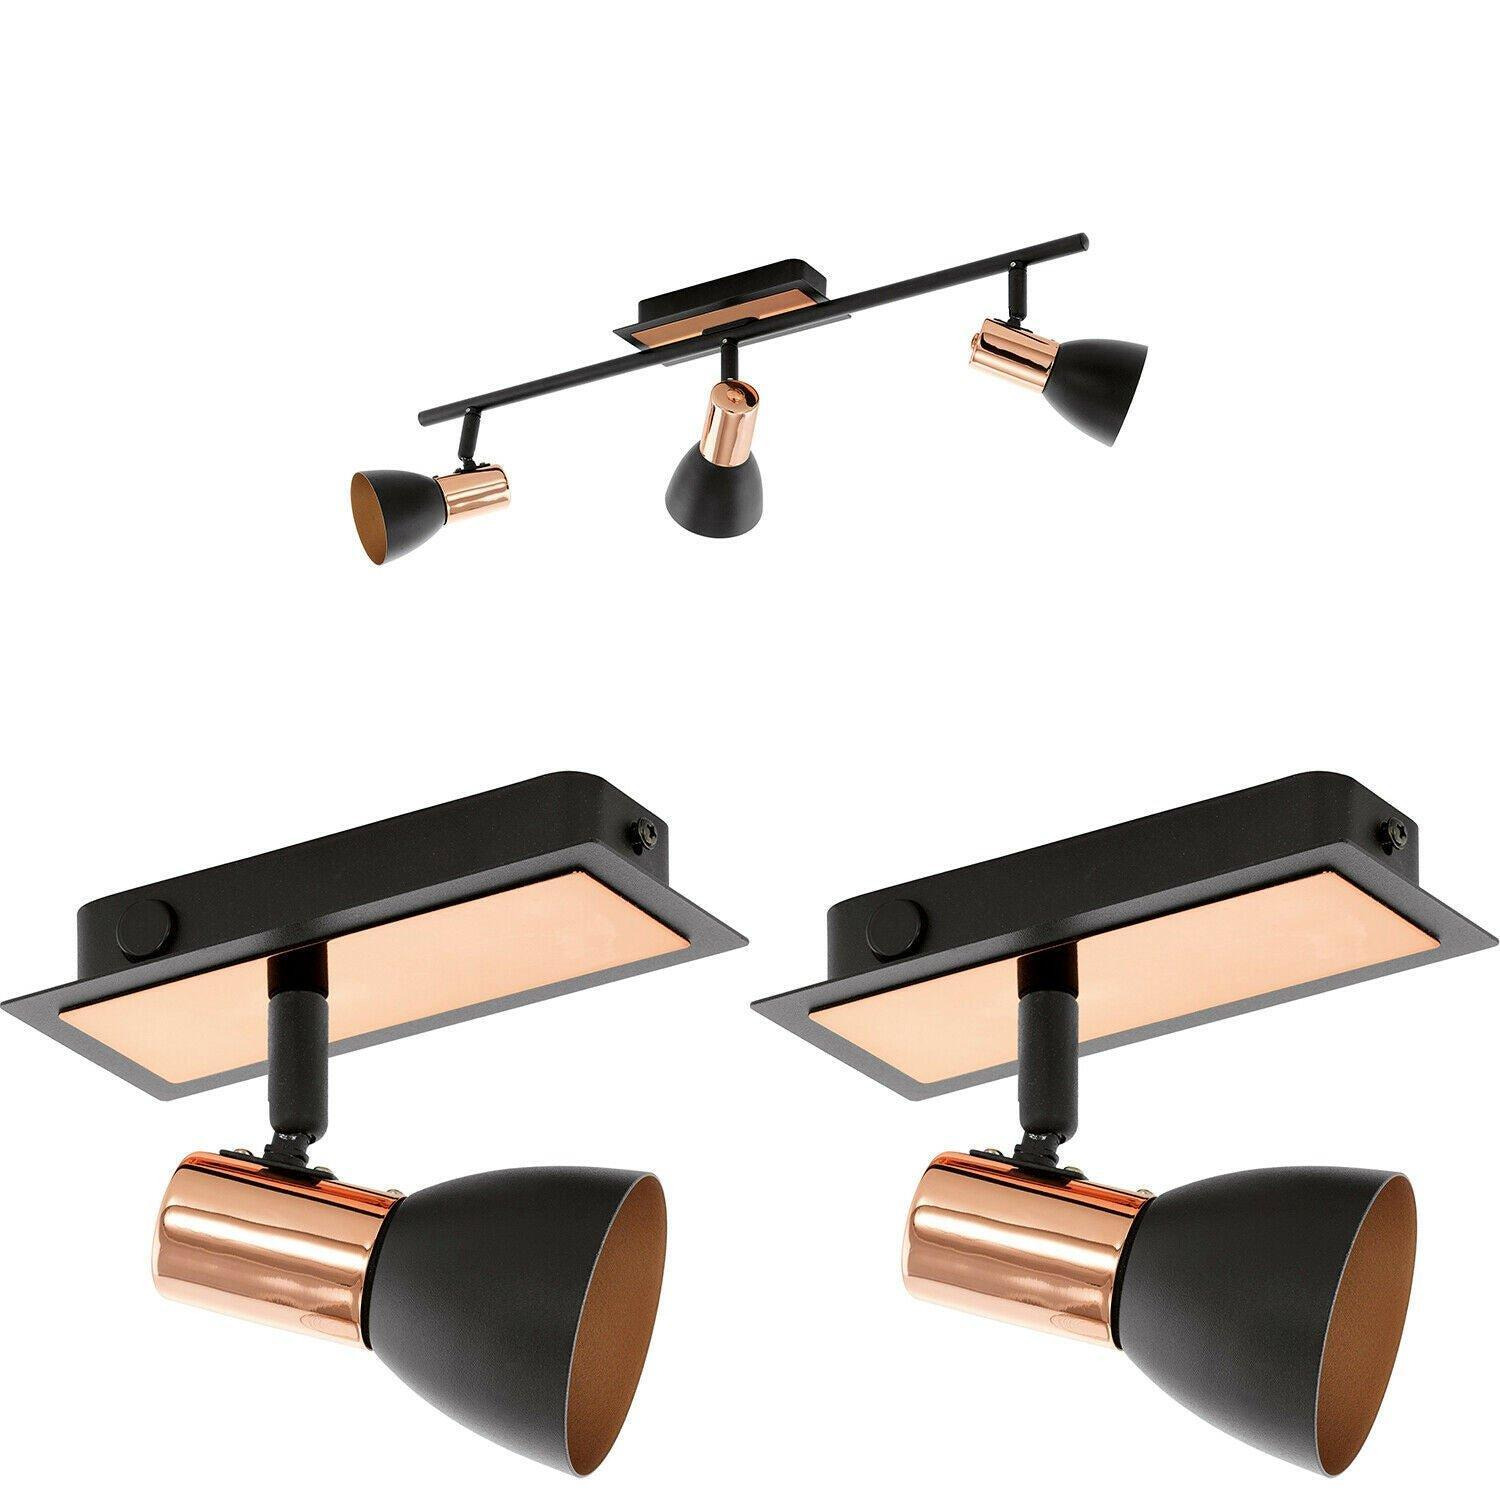 Ceiling Spot Light & 2x Matching Wall Lights Black & Copper Adjustable Shade - image 1